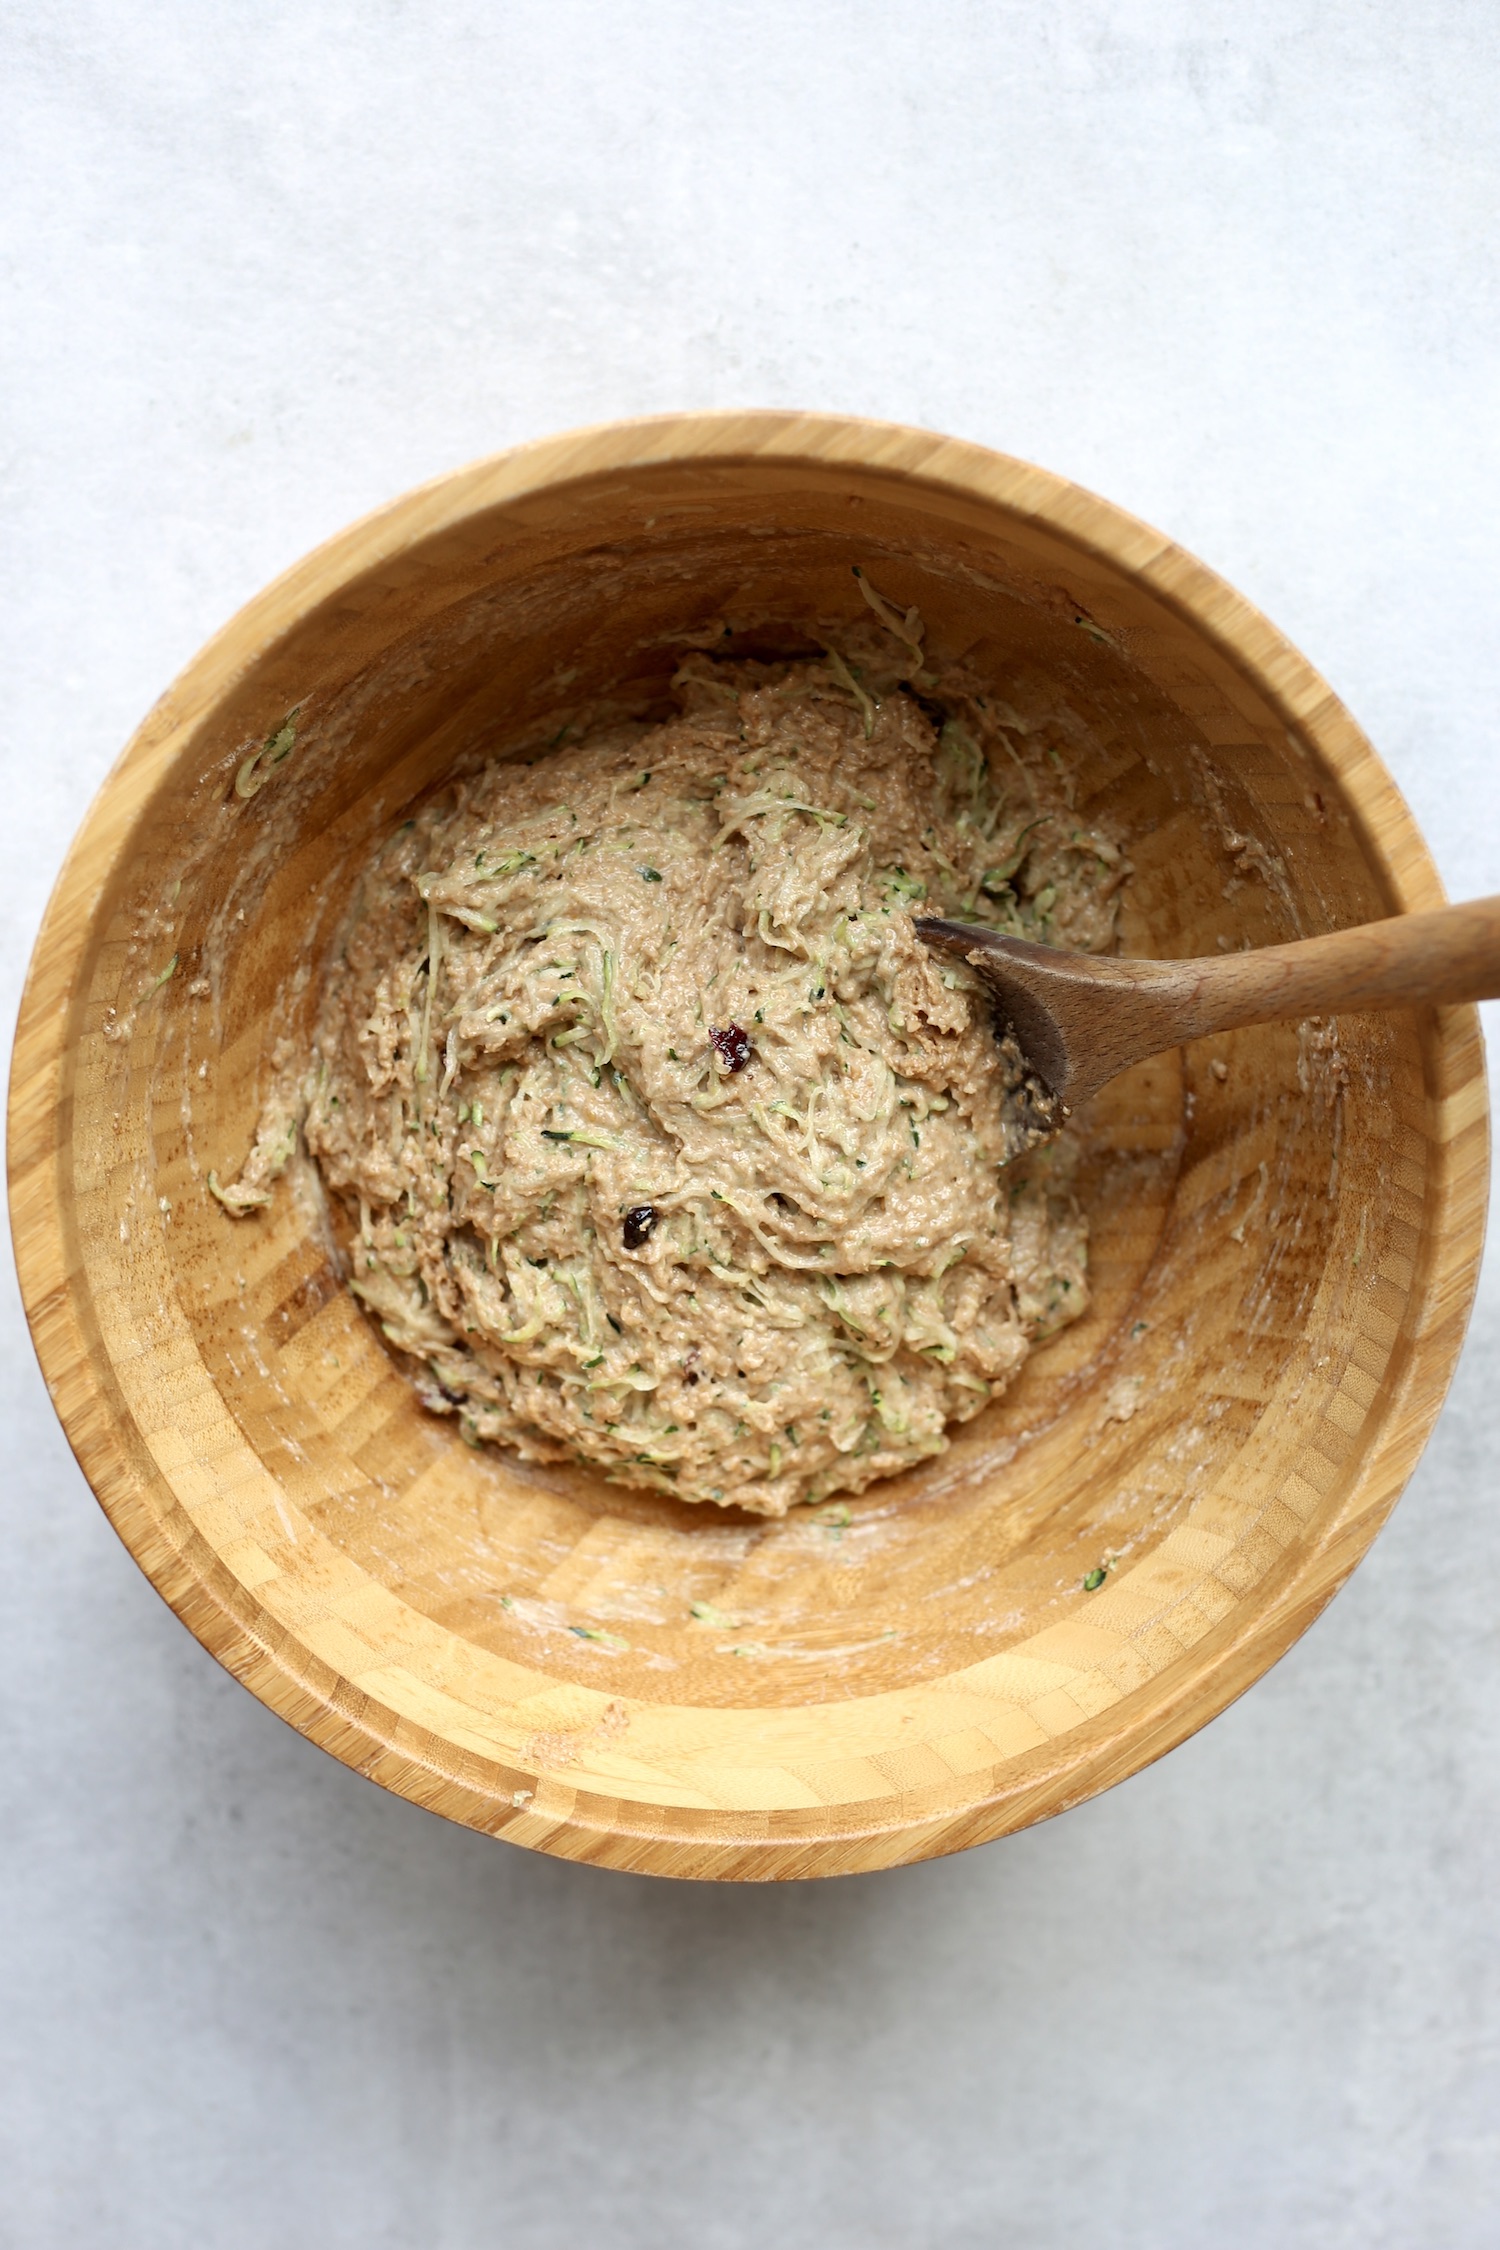 Shredded zucchini and raisins being stirred into muffin batter with a wooden spoon in a large wooden mixing bowl. 